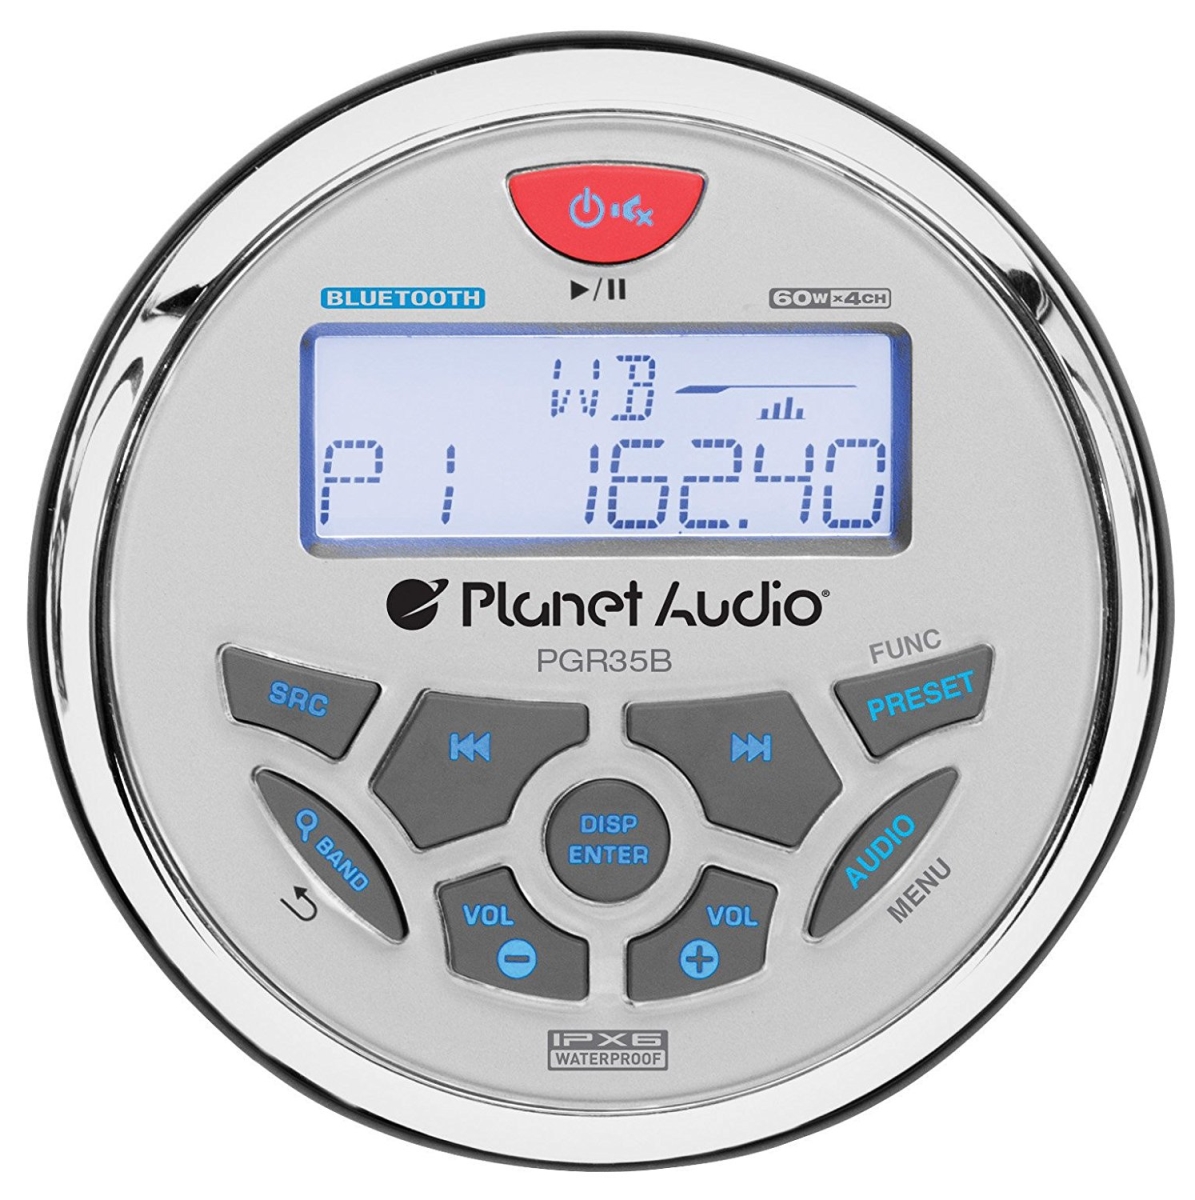 Picture of Planetaudio PGR35B Gauge MECH-LESS Multimedia Player CD or DVD, Receiver with Audio Streaming